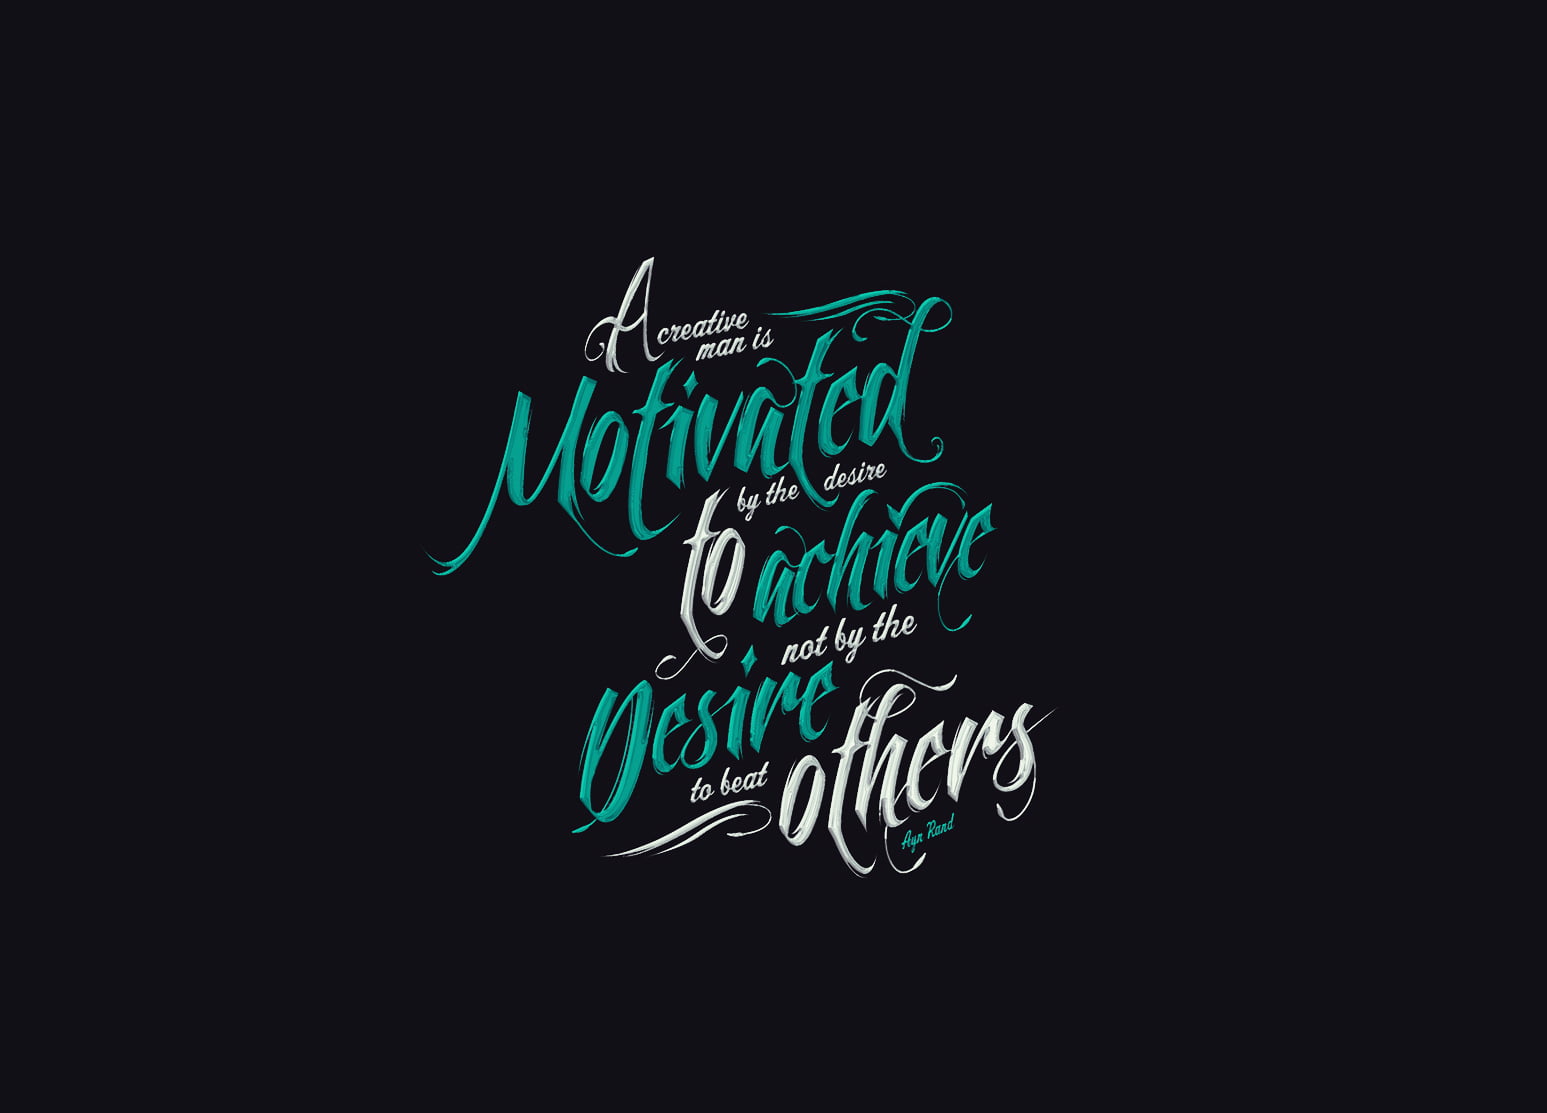 Motivated to achieve desire others quote